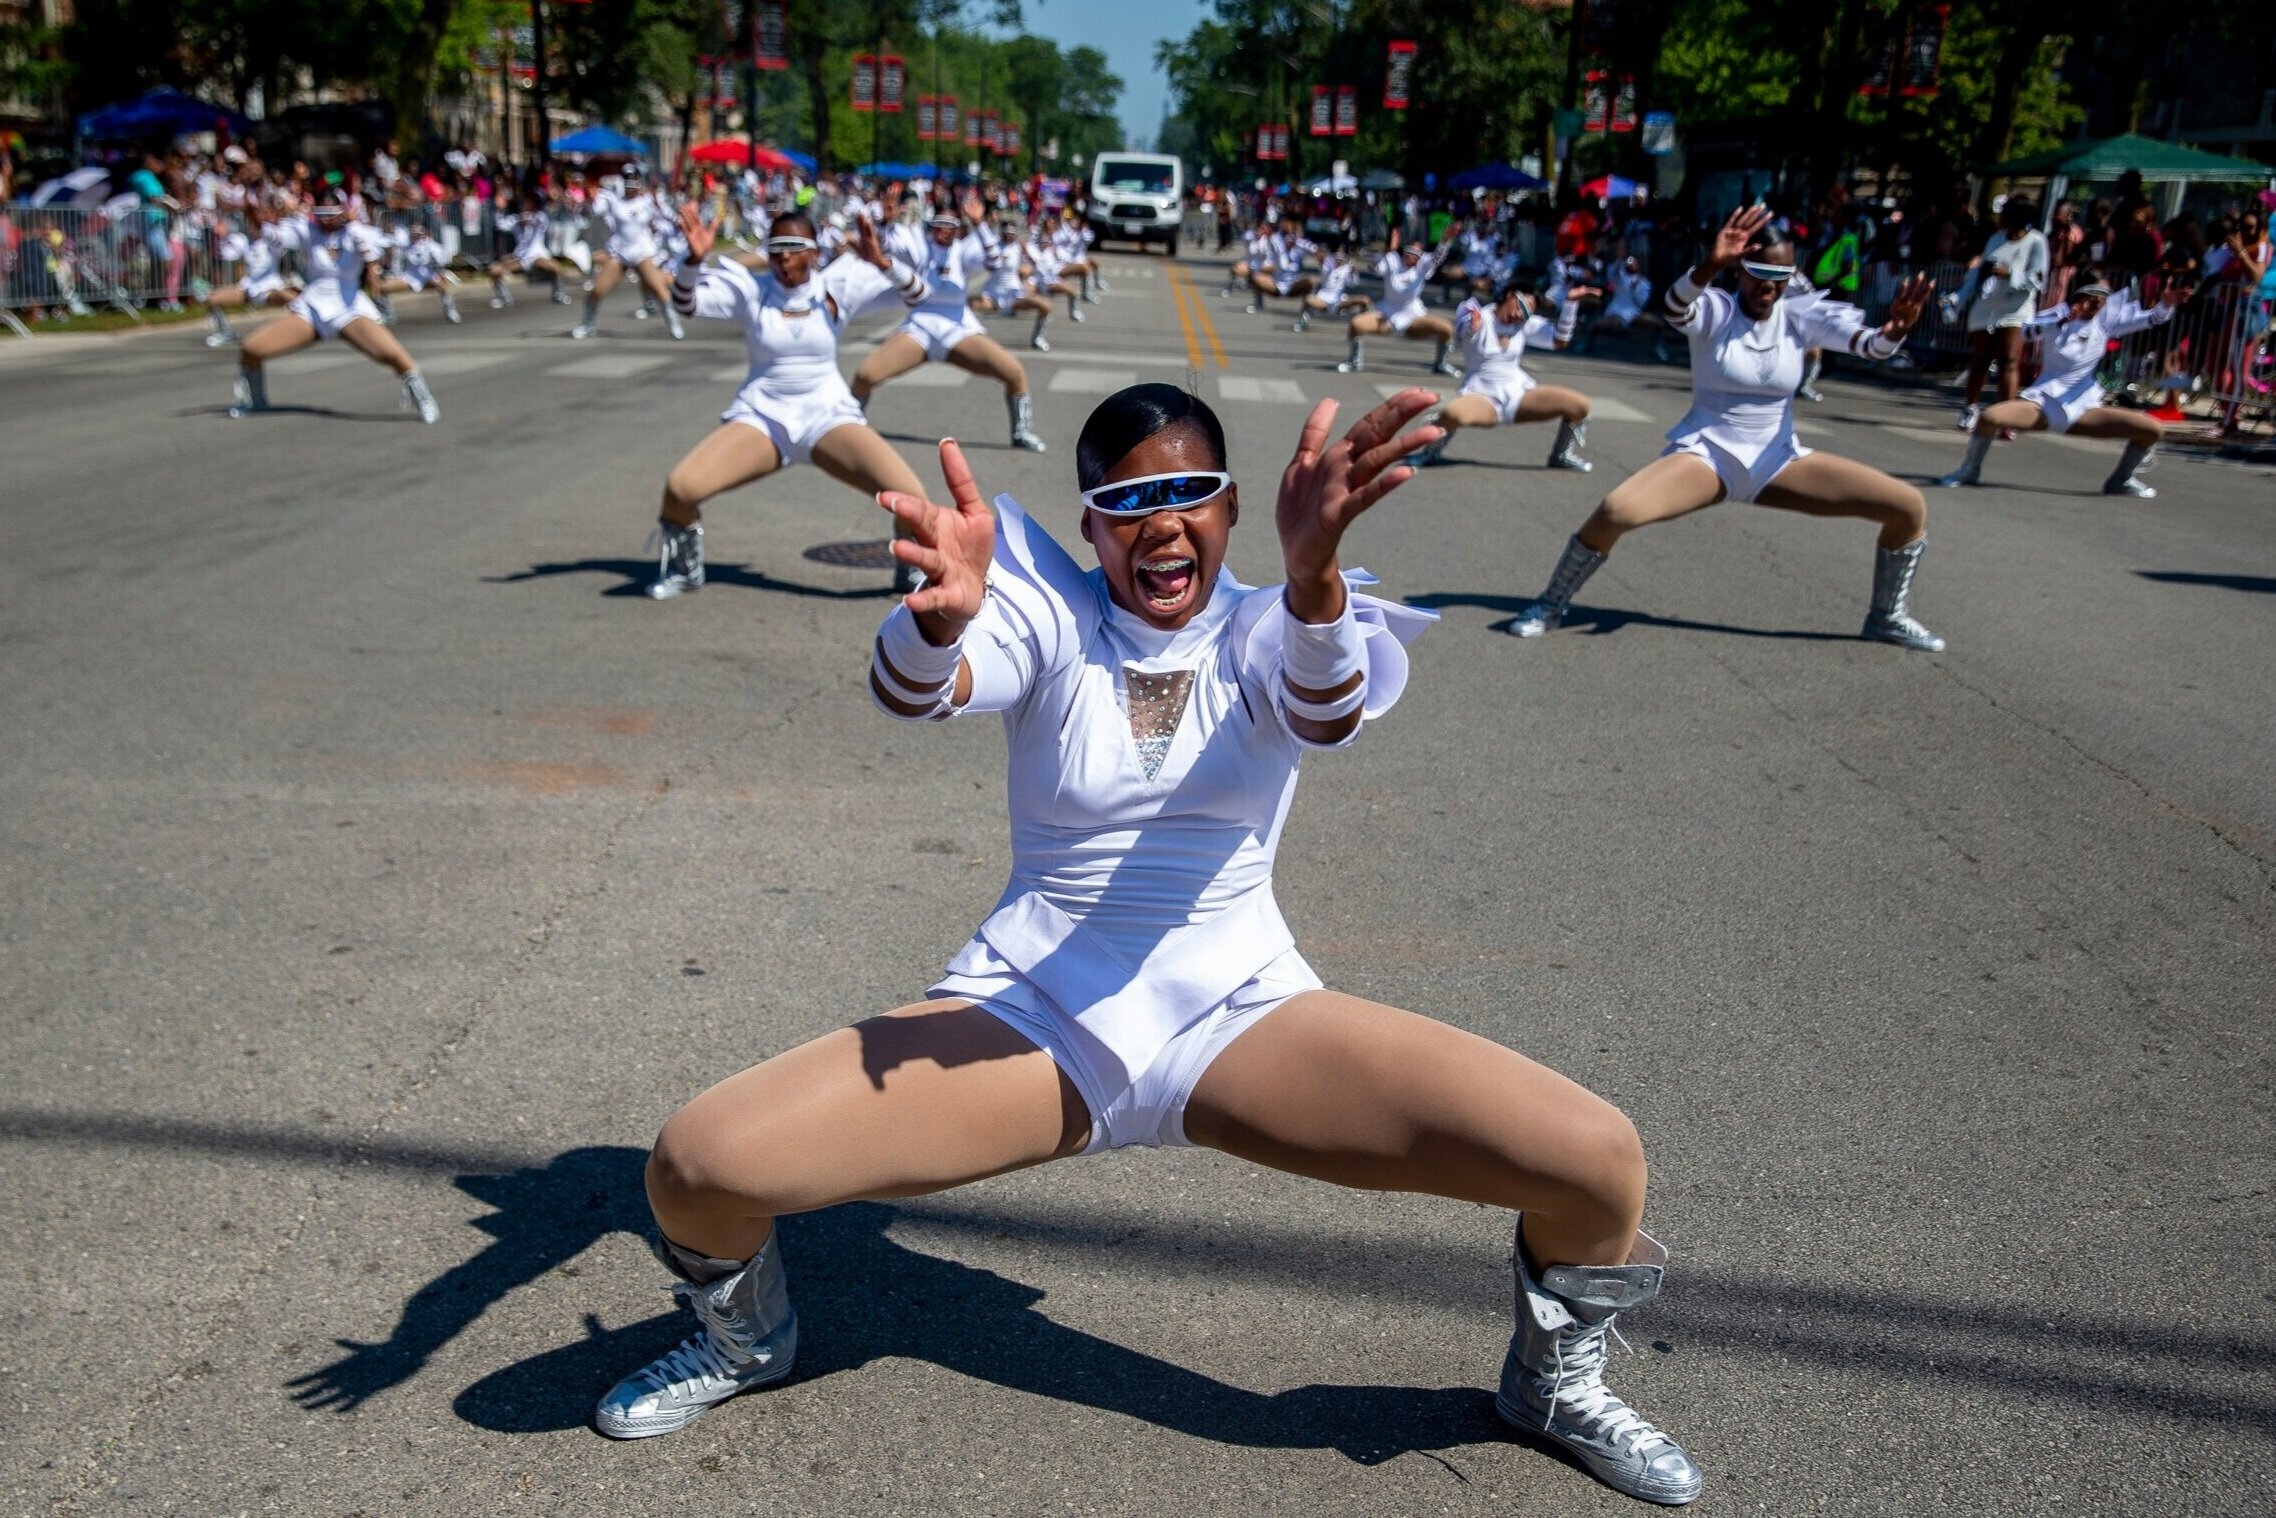  Marching bands and dancers from South Side high schools participate in the 90th annual Bud Billiken parade in Chicago's Bronzeville neighborhood Saturday, August 10, 2019, for the Chicago Tribune. 